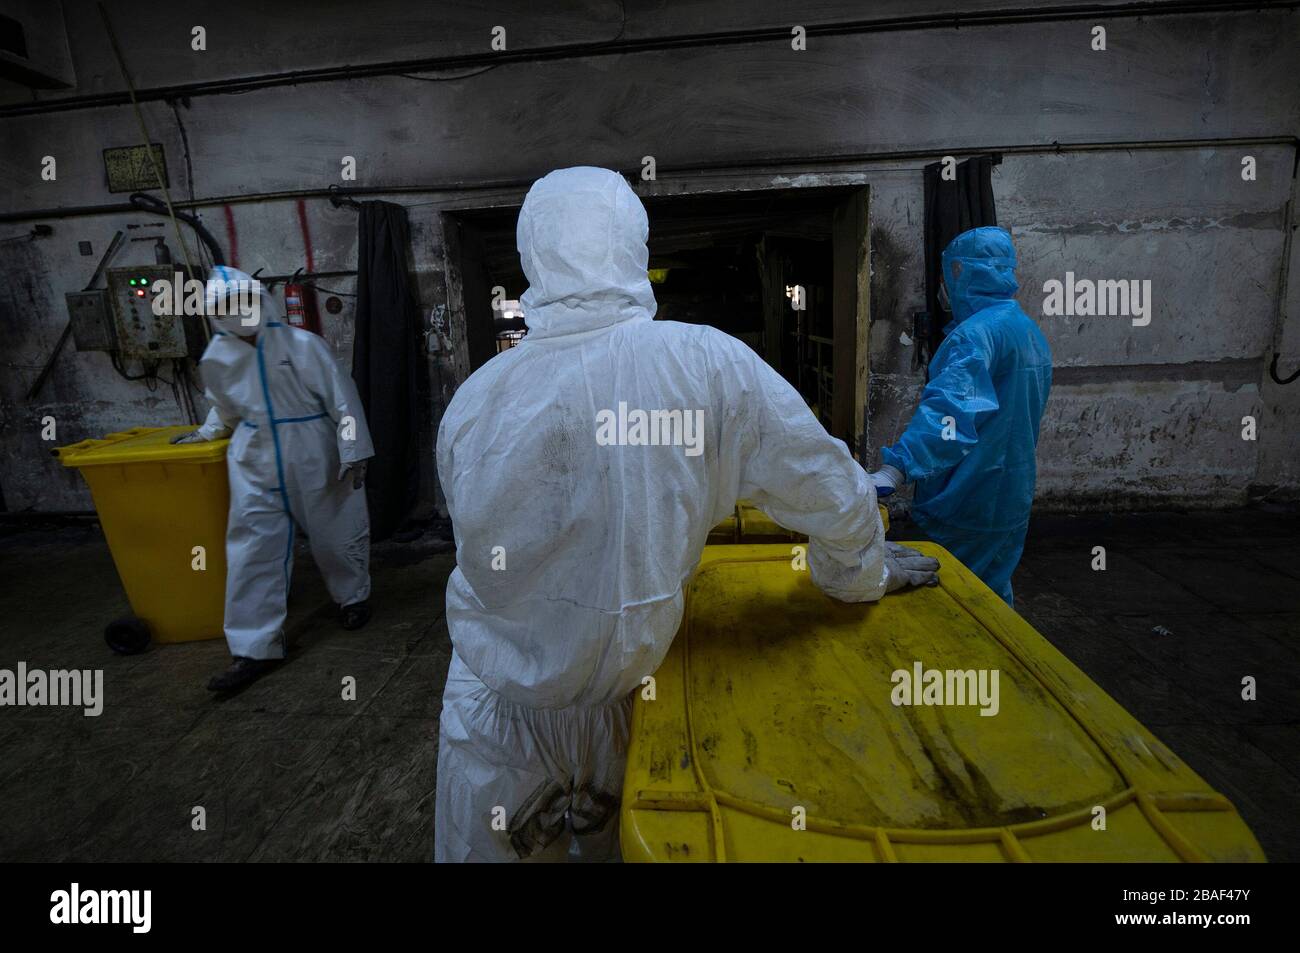 (200327) -- WUHAN, March 27, 2020 (Xinhua) -- Wang Peng (C) and his colleagues work at a medical waste treatment company in Wuhan, central China's Hubei Province, March 26, 2020. Wang Peng, 35, has been working for the Wuhan Hanshi Environmental Engineering Company for 9 years, where he is responsible for the disposal and incineration of medical waste.Protection against infection is a major challenge that Wang and his coworkers face, as they work 12-hour shifts to cope with the surging workload during the COVID-19 outbreak. 'I like what I'm doing,' Wang said, 'I'm not only making money for my Stock Photo